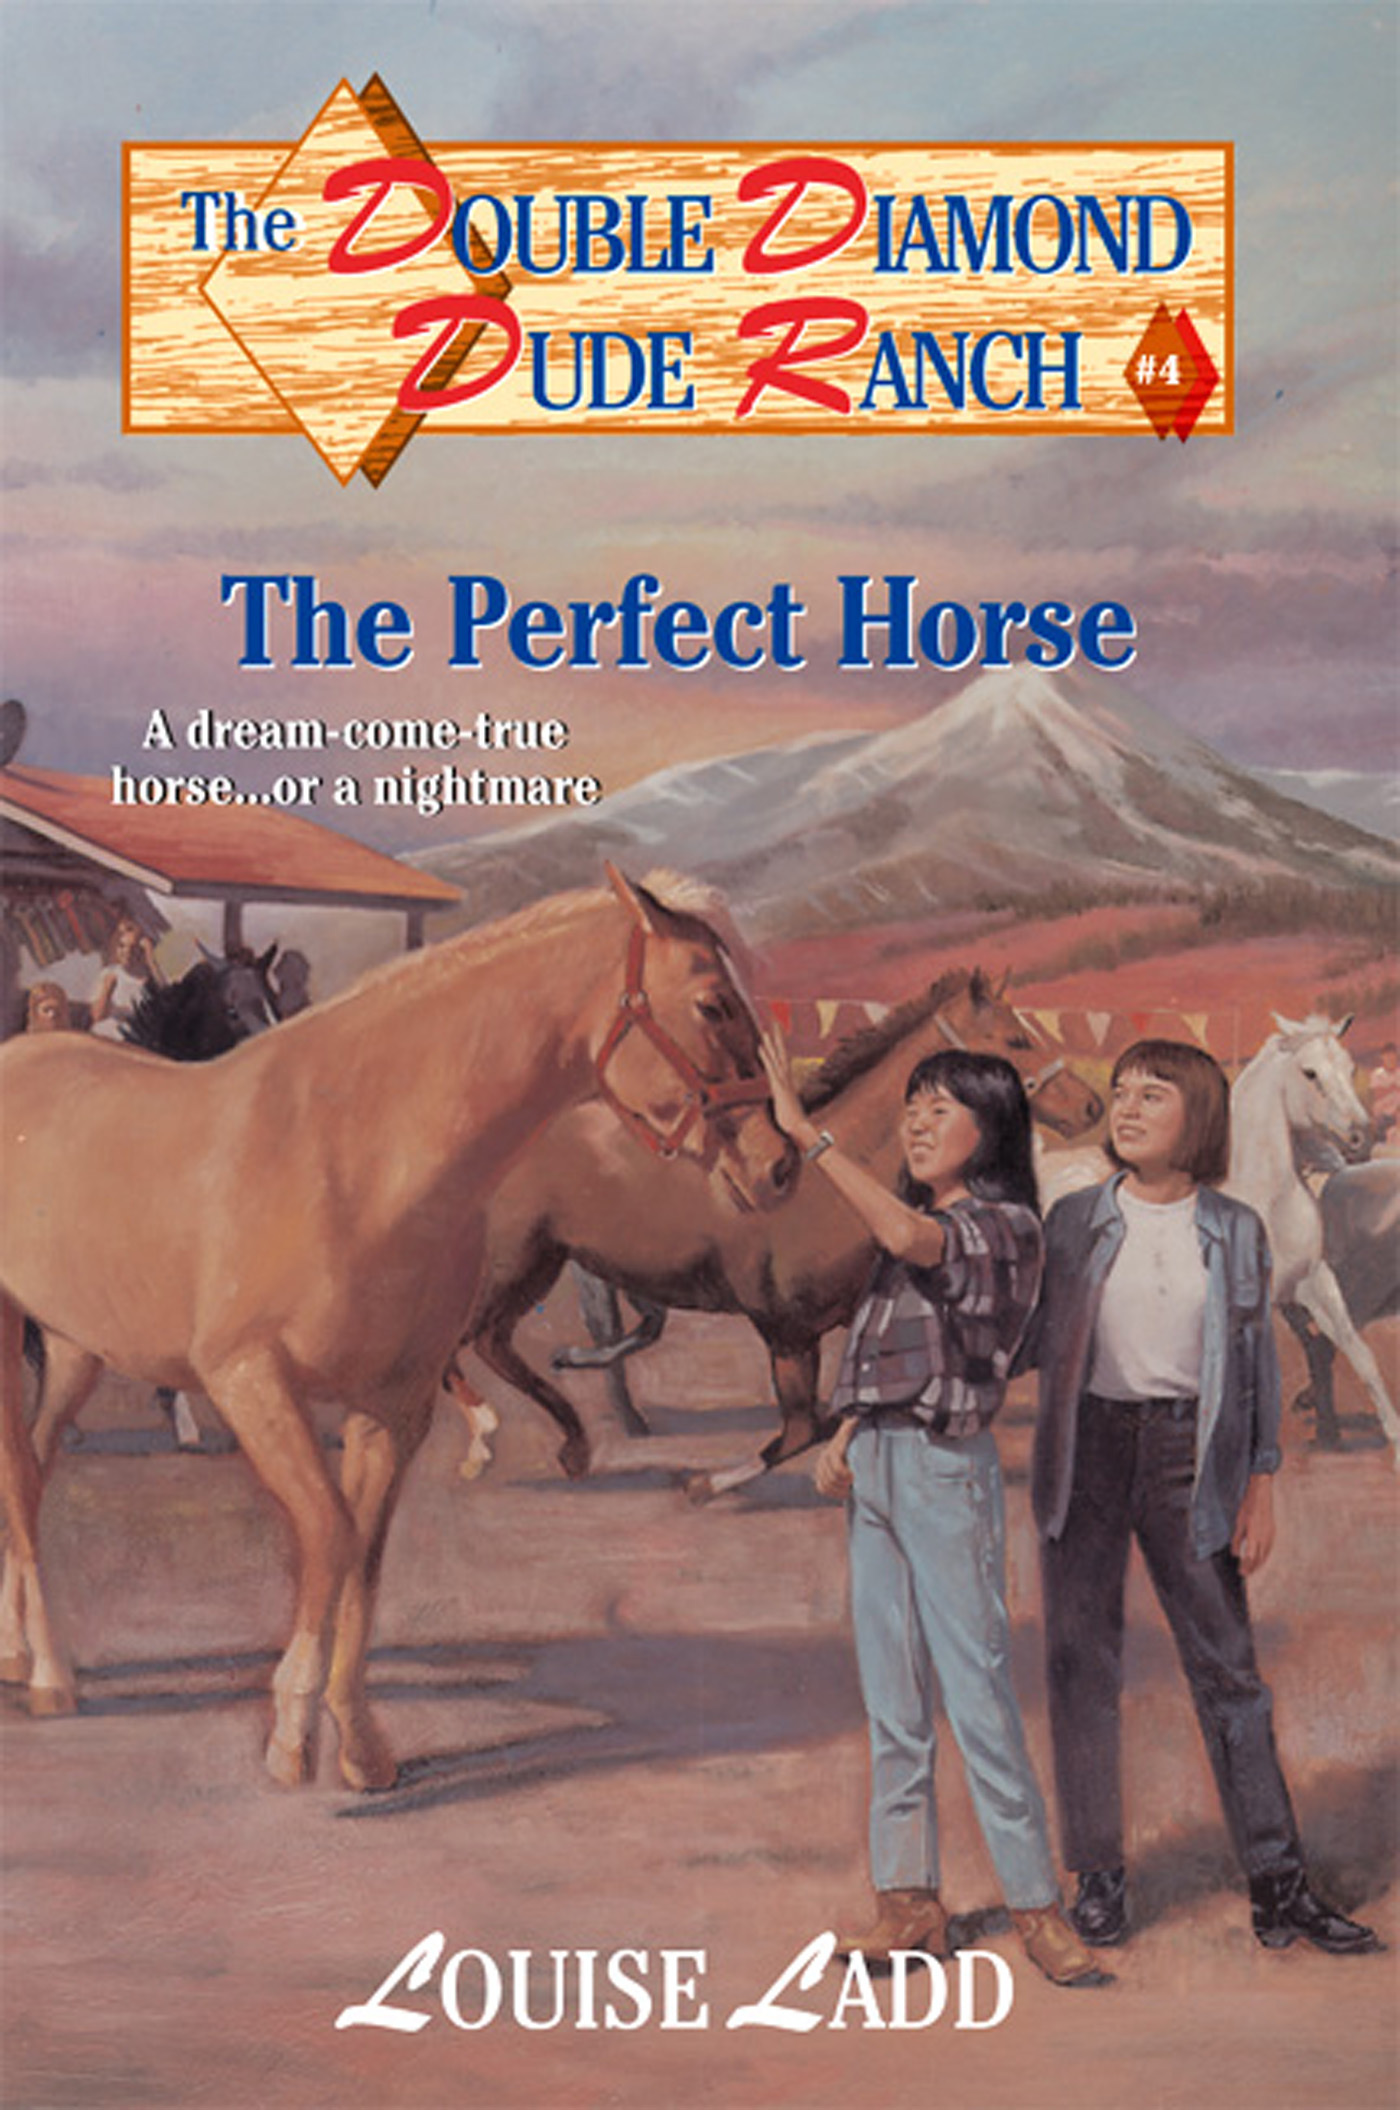 Double Diamond Dude Ranch #4 - The Perfect Horse by Louise Ladd